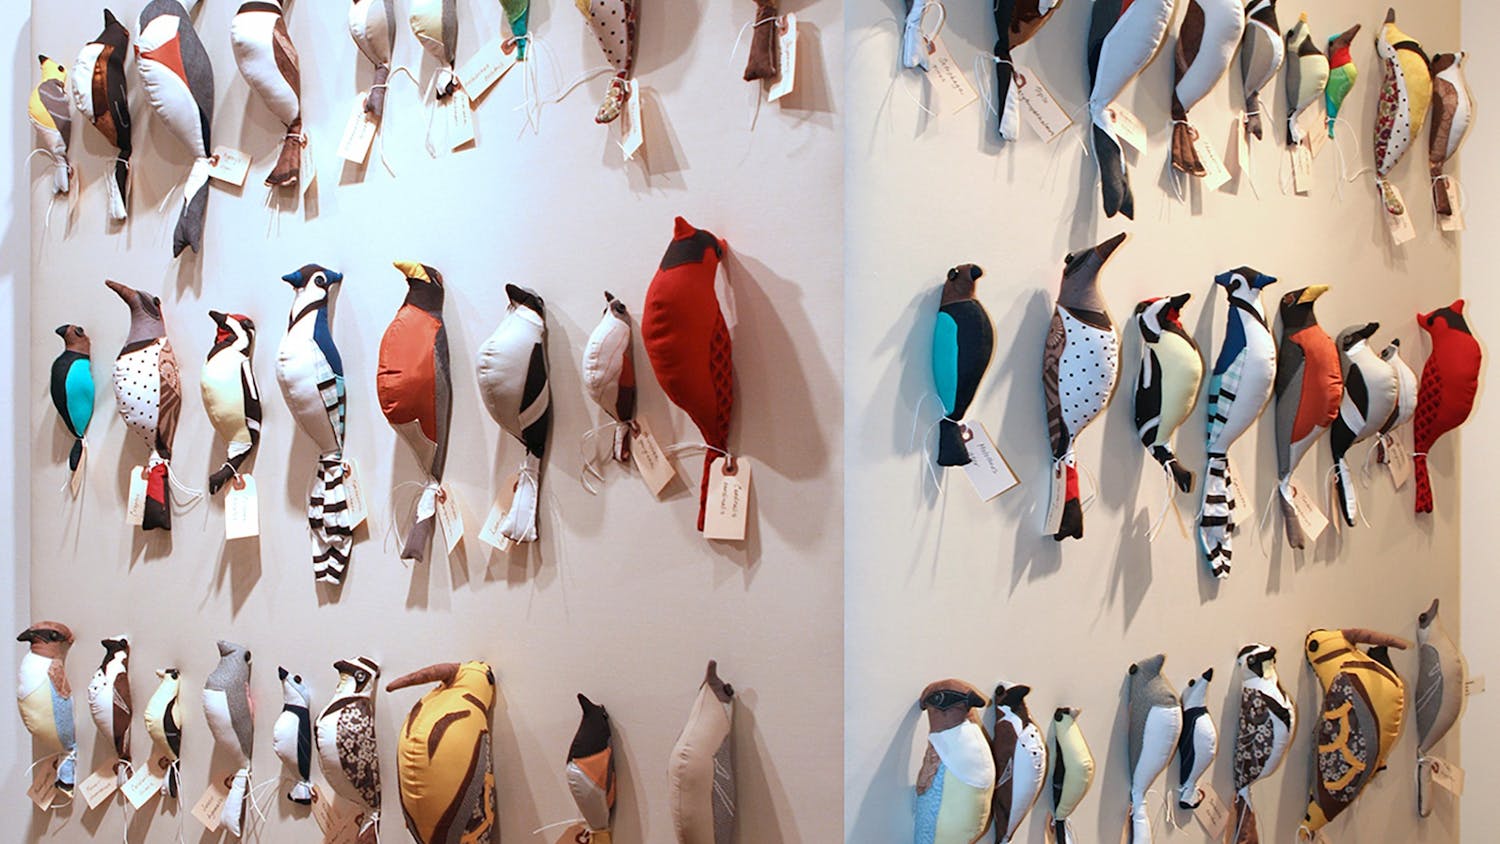 Collection of the stuffed birds handcrafted by Eloisa Guanlao, sewn from her children’s outgrown clothing.